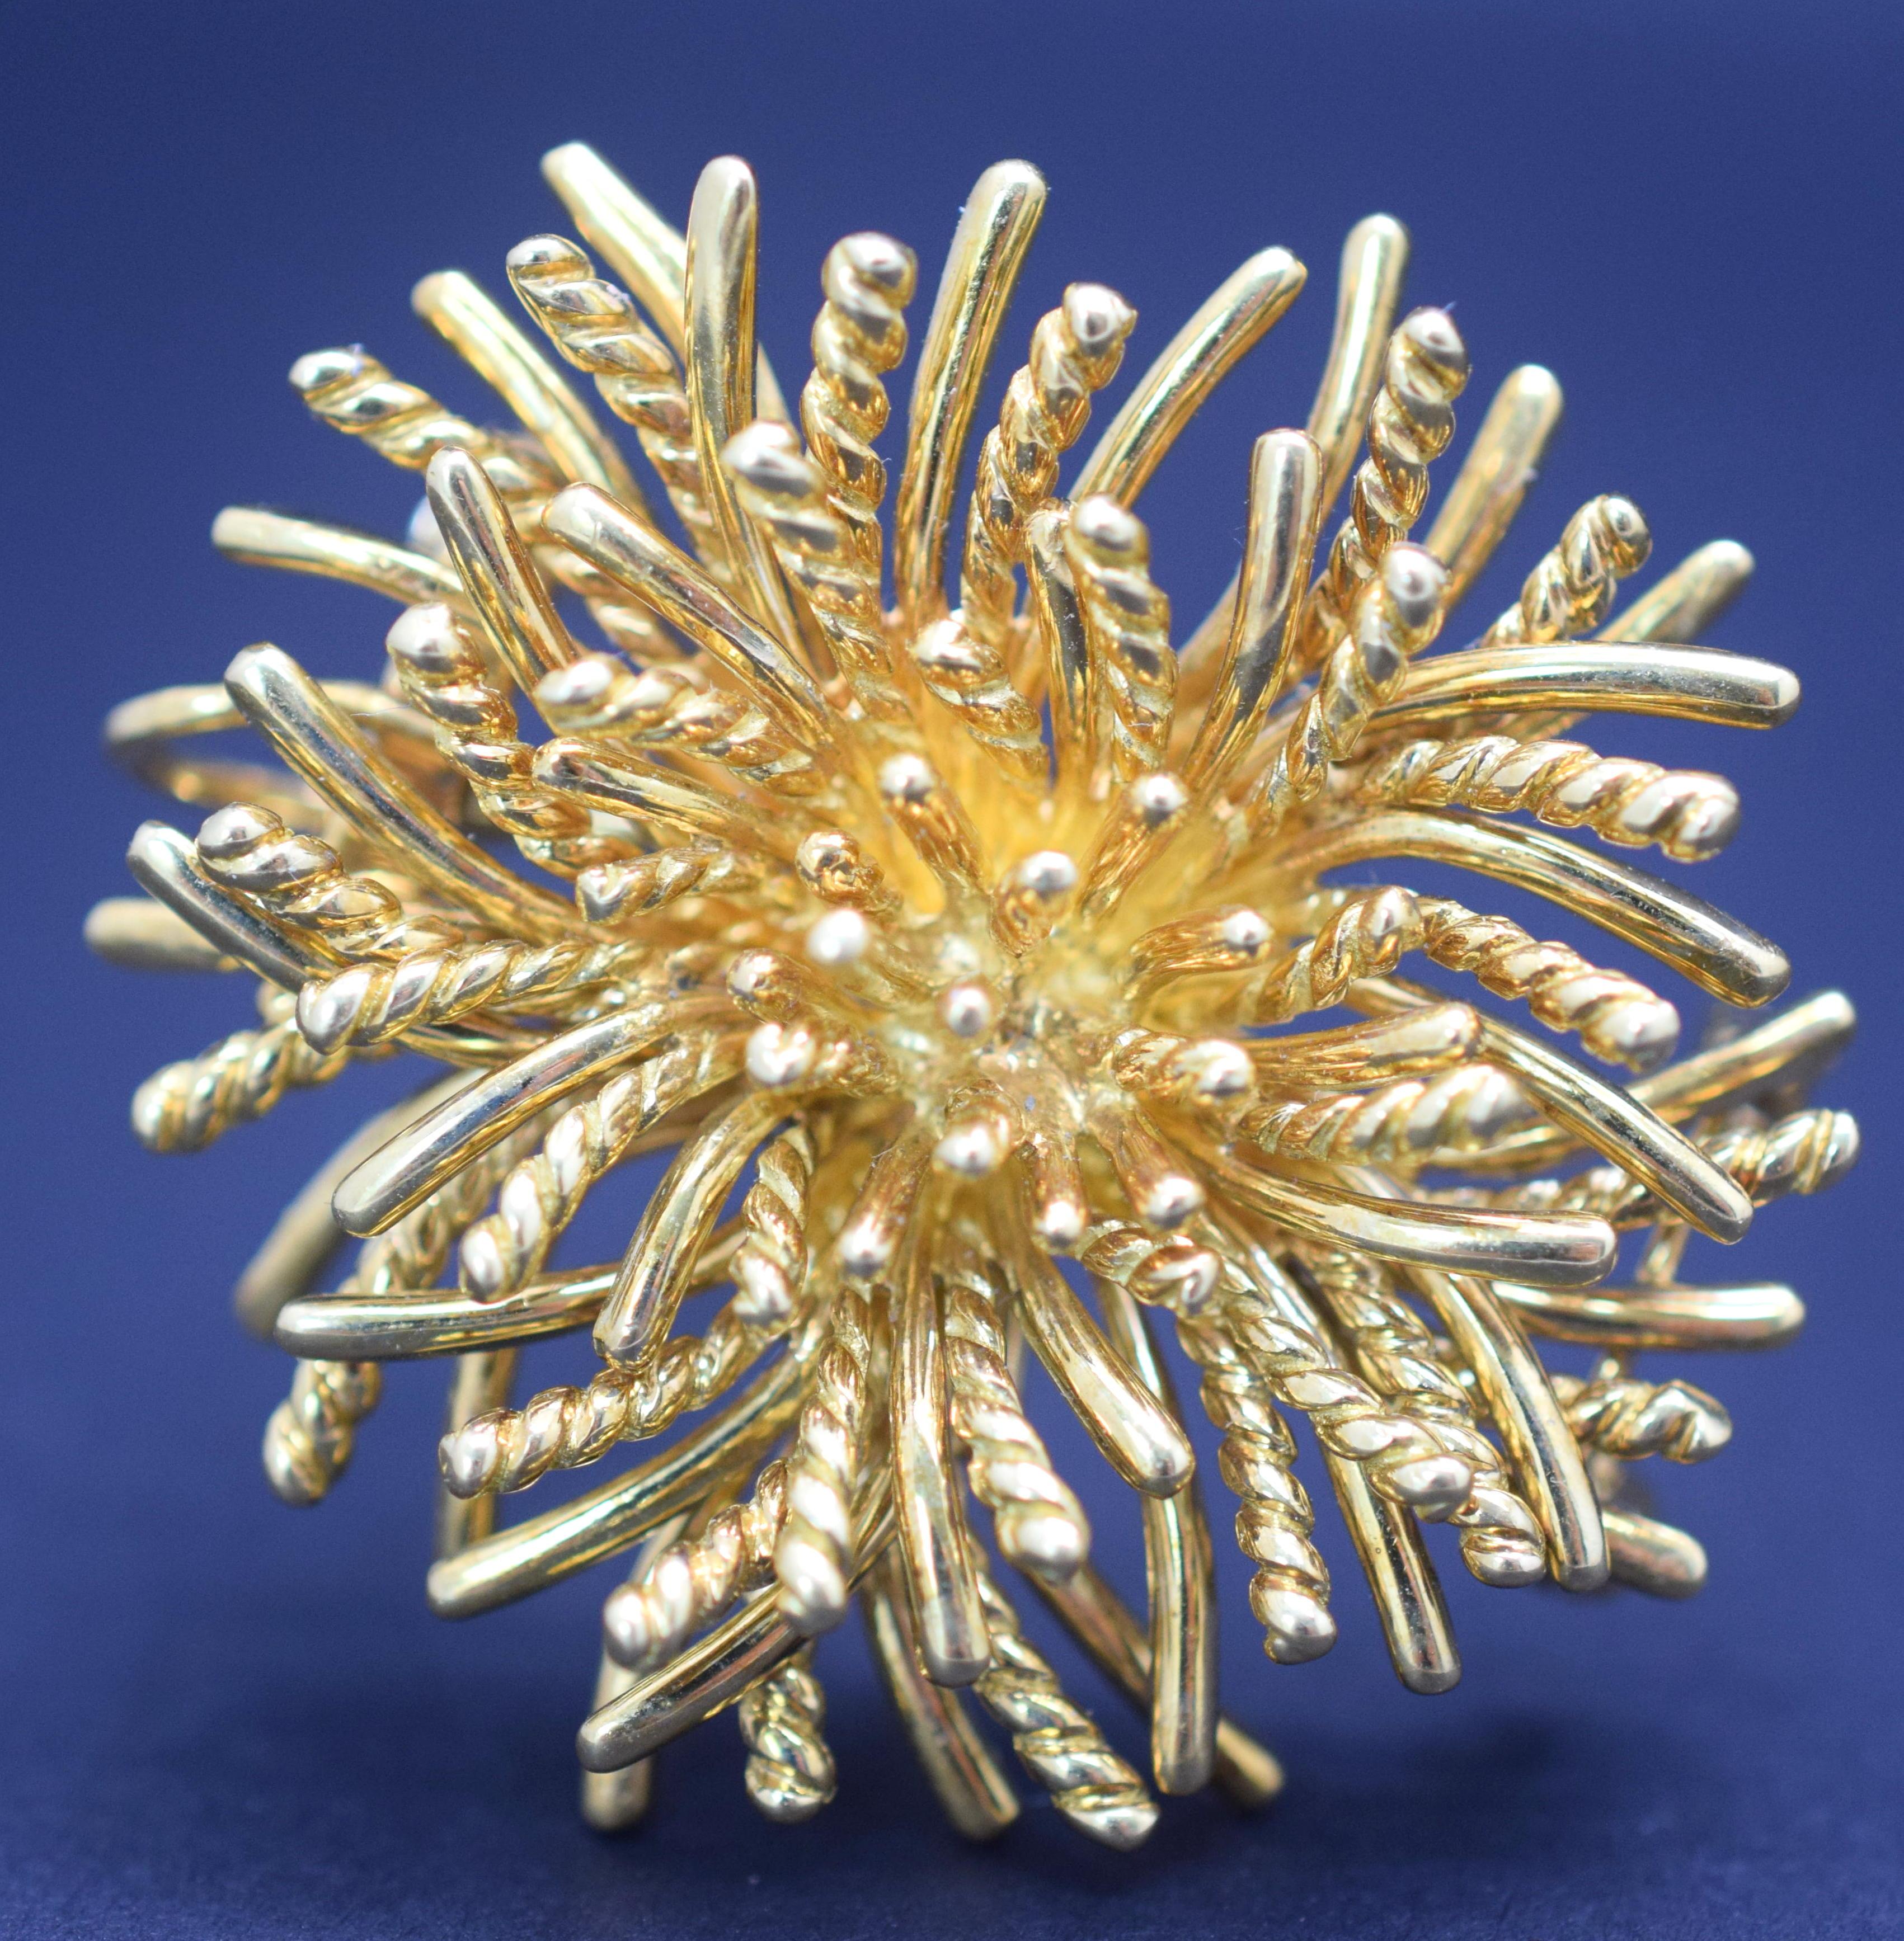 Tiffany & Co sea anemone brooch crafted in 18k yellow gold. The sea anemone pin was created in the 1970’s. The diameter of the broach is 1 ½